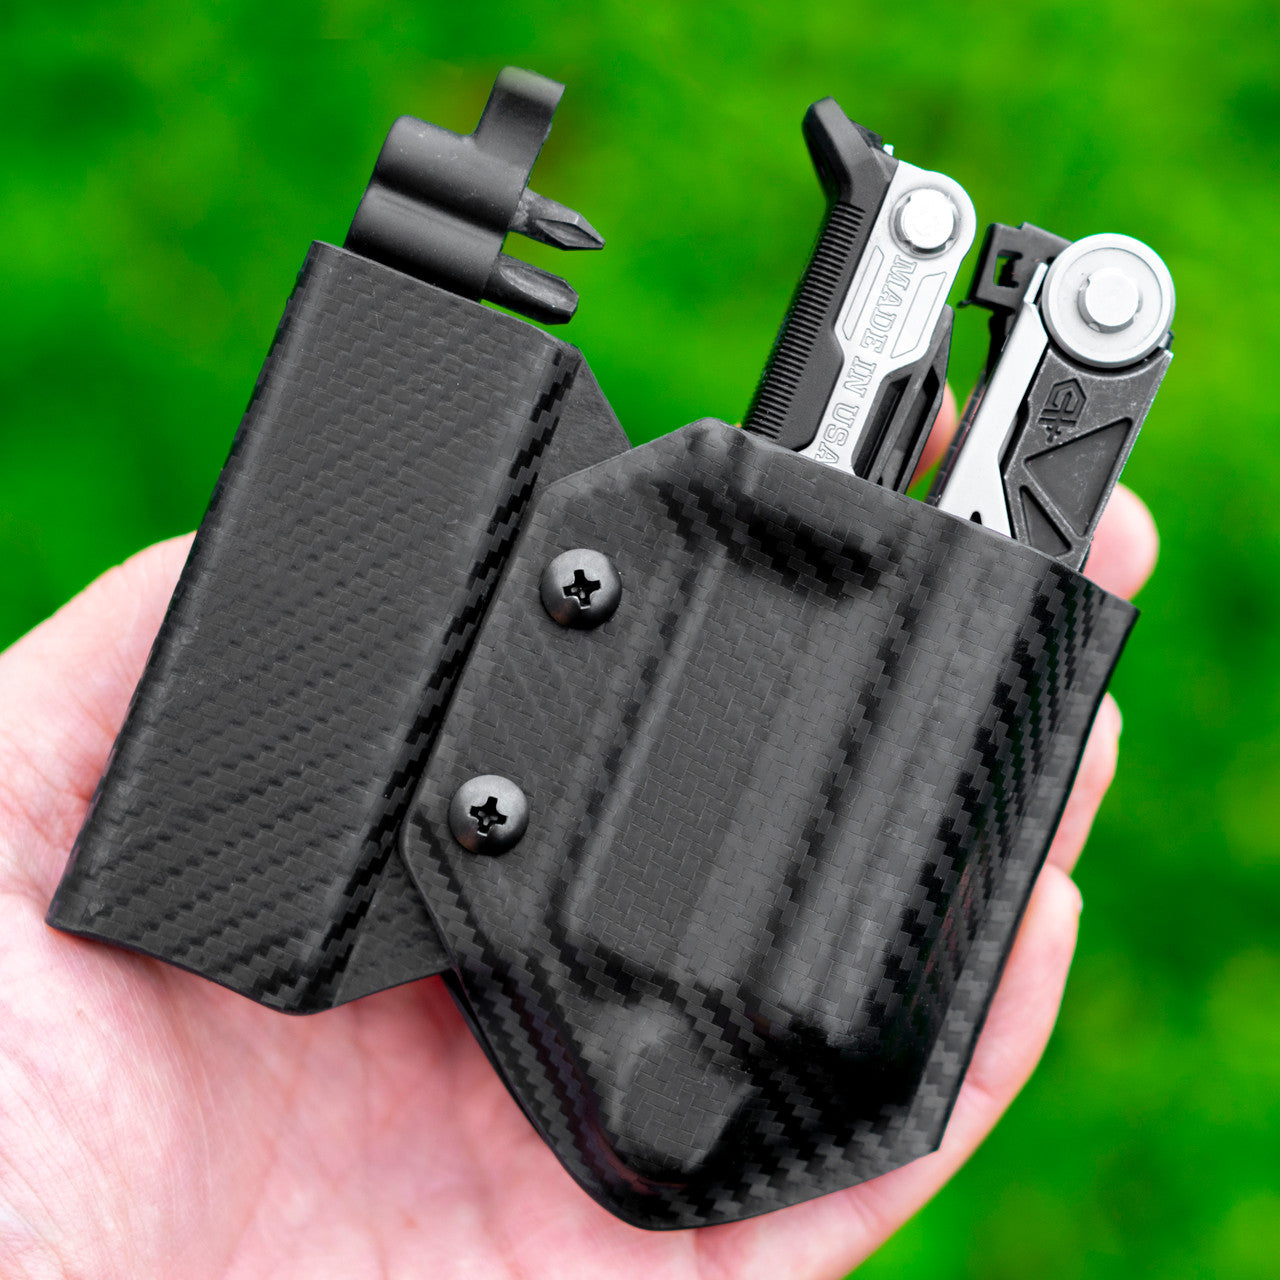 USA Made Kydex Sheath for the Gerber Center Drive with Bit Kit